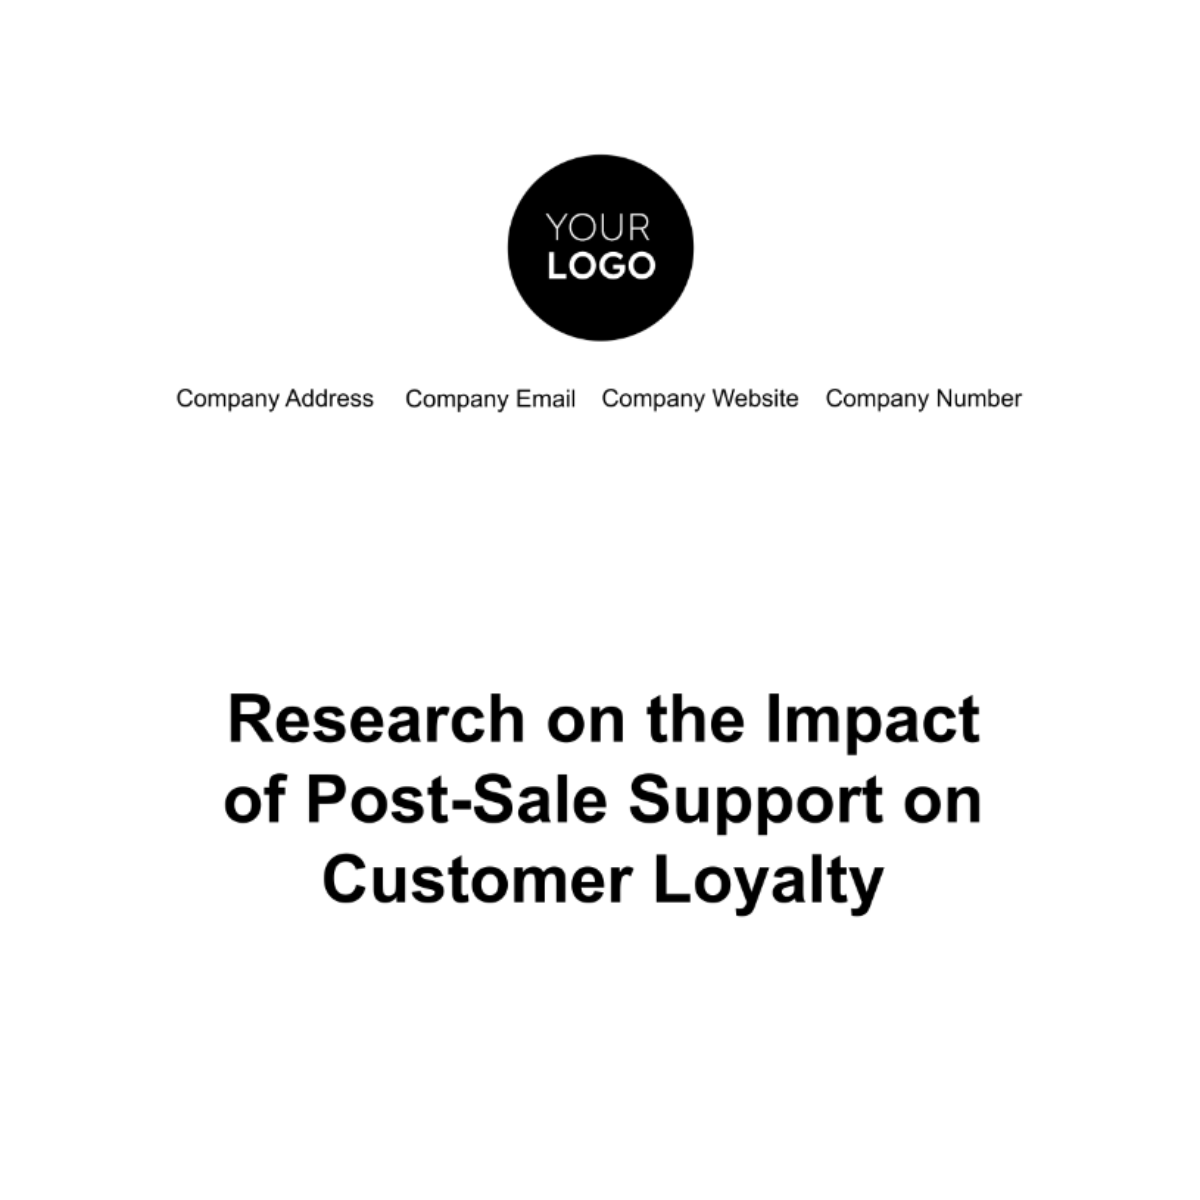 Free Research on the Impact of Post-Sale Support on Customer Loyalty Template